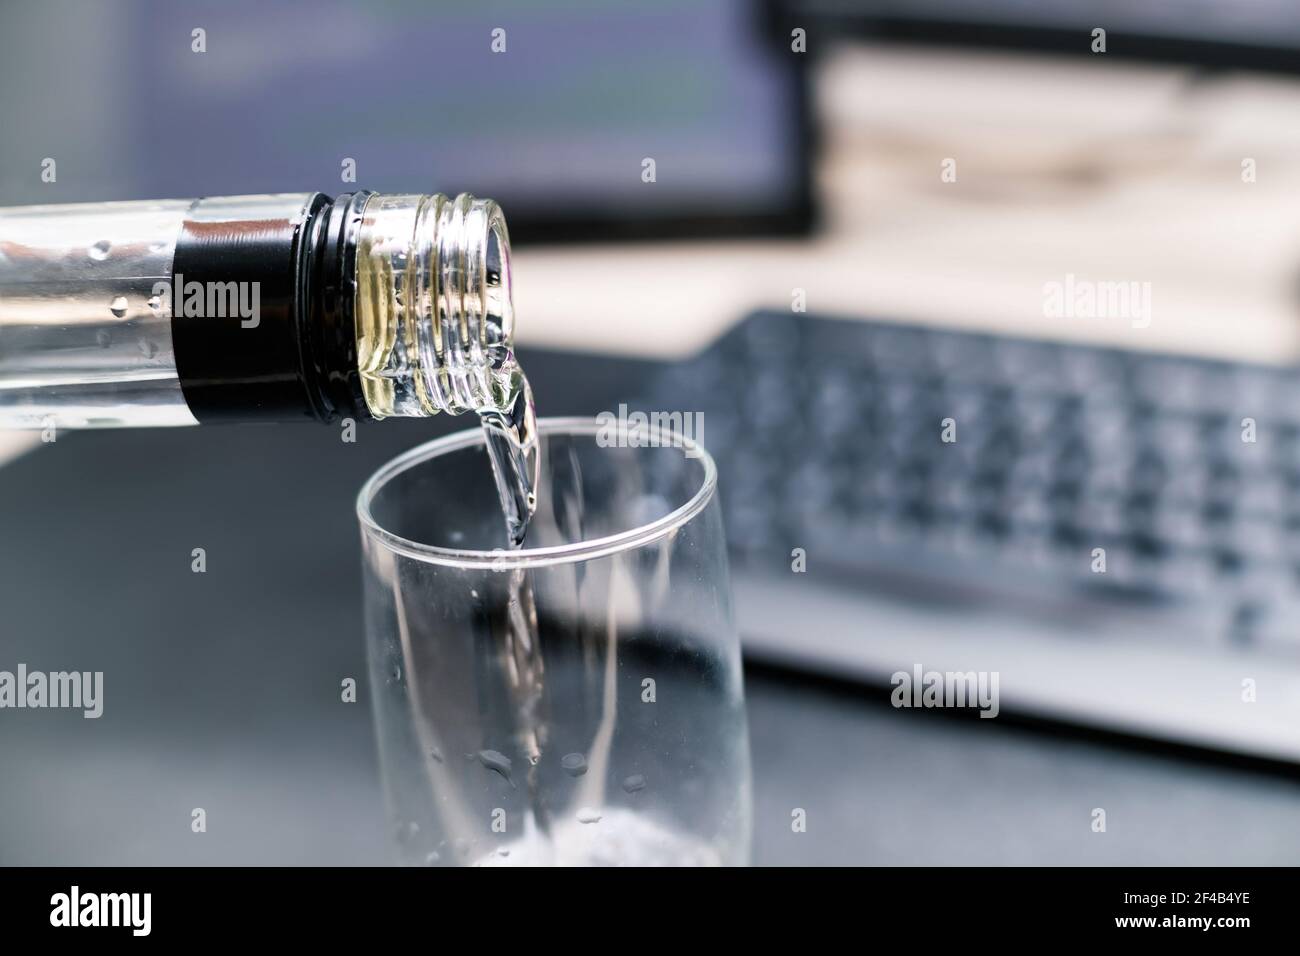 Drinking alcohol at work or office. Vodka is poured in a glass. Defocused keyboard and desk showing vision problems and drowsiness. Concept for how to Stock Photo